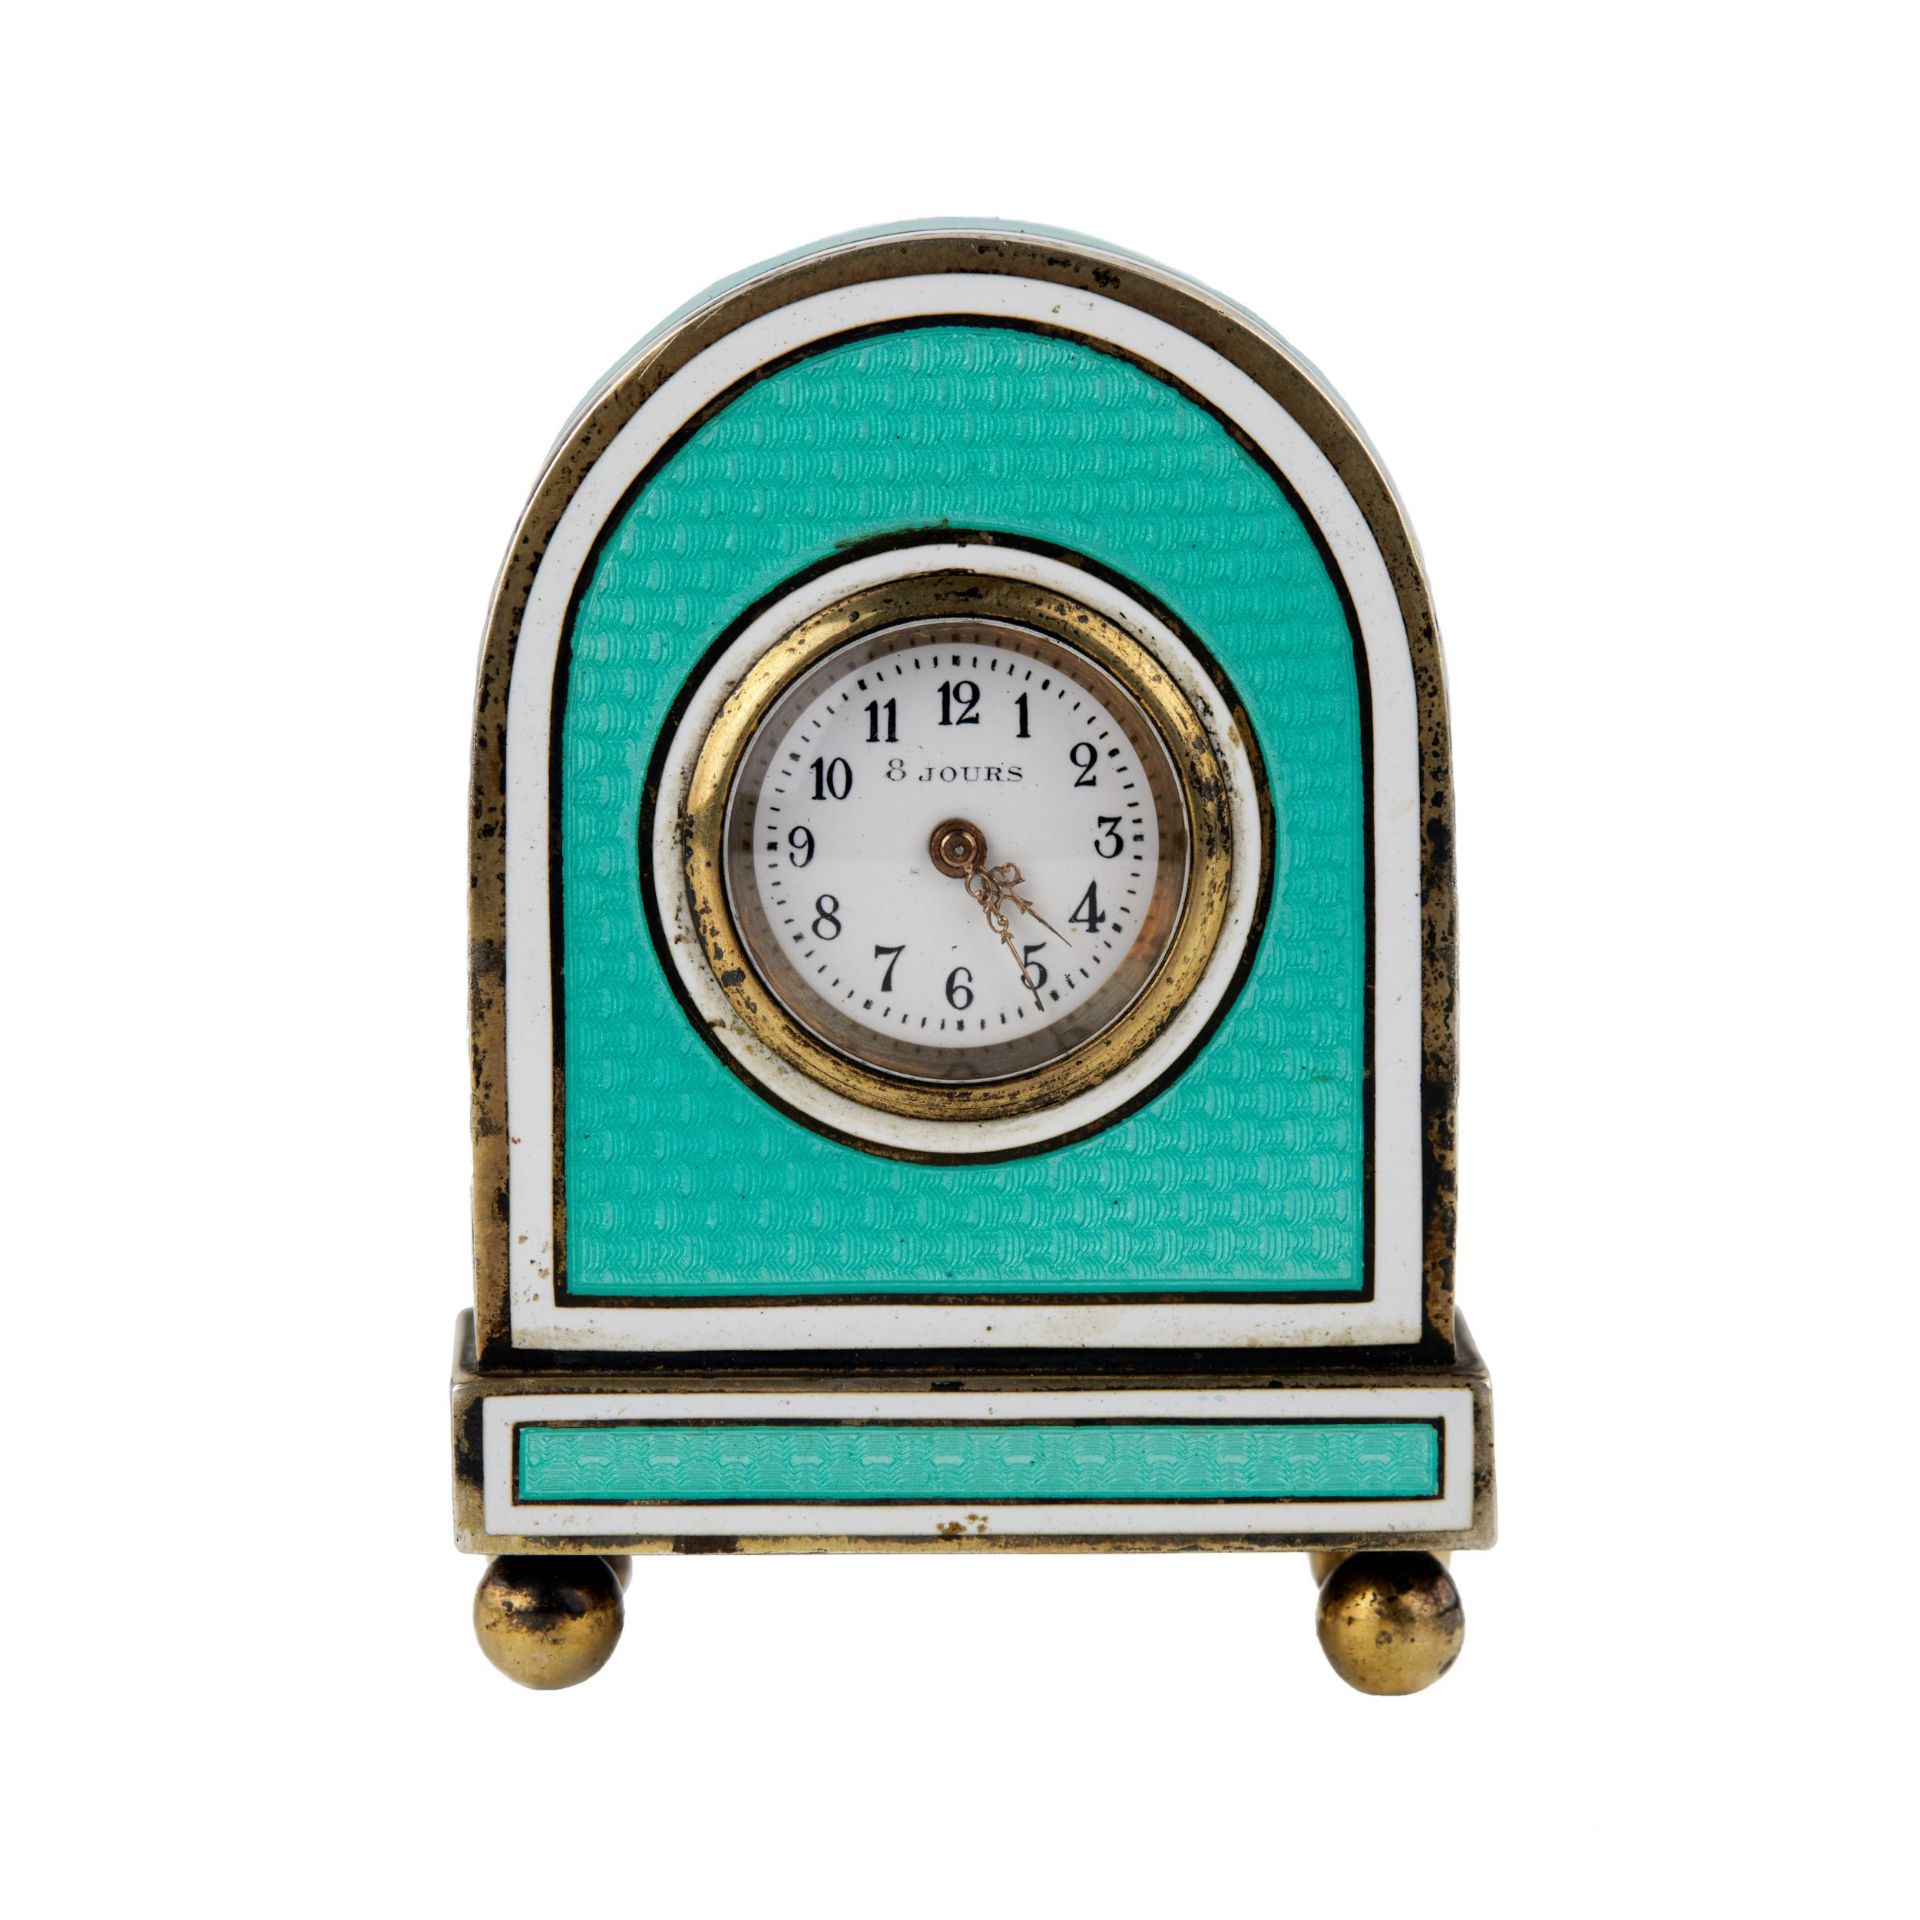 Miniature travel clock in guilloche enamel on silver, in its own case. - Image 2 of 10